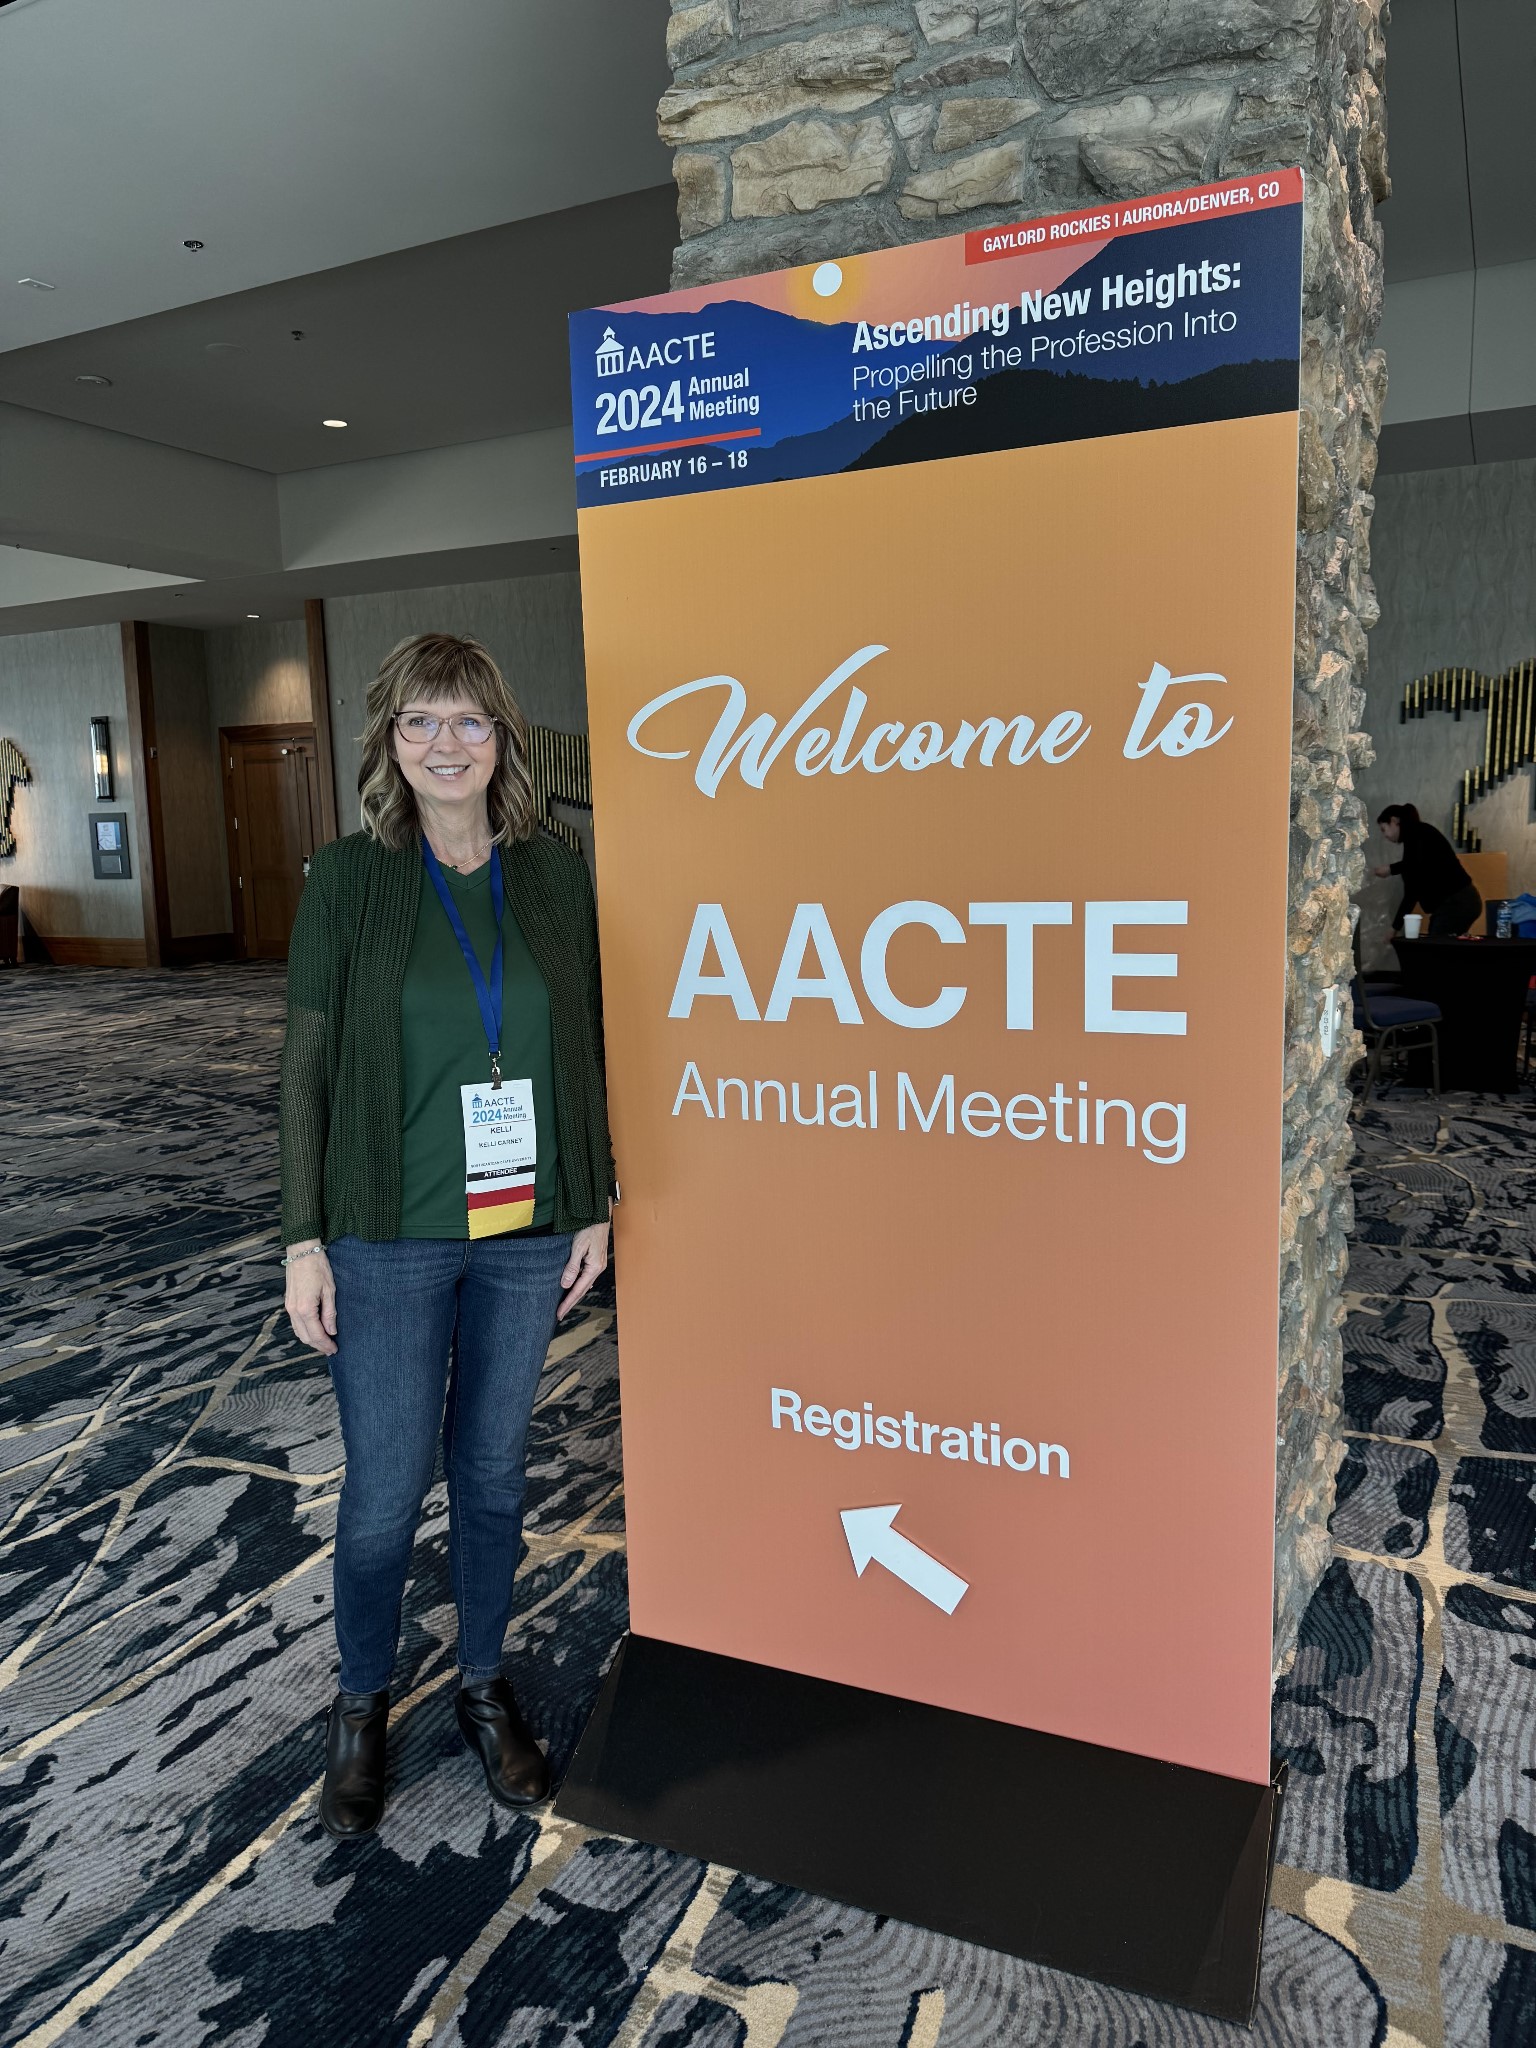 Dr. Carney at AACTE Meeting